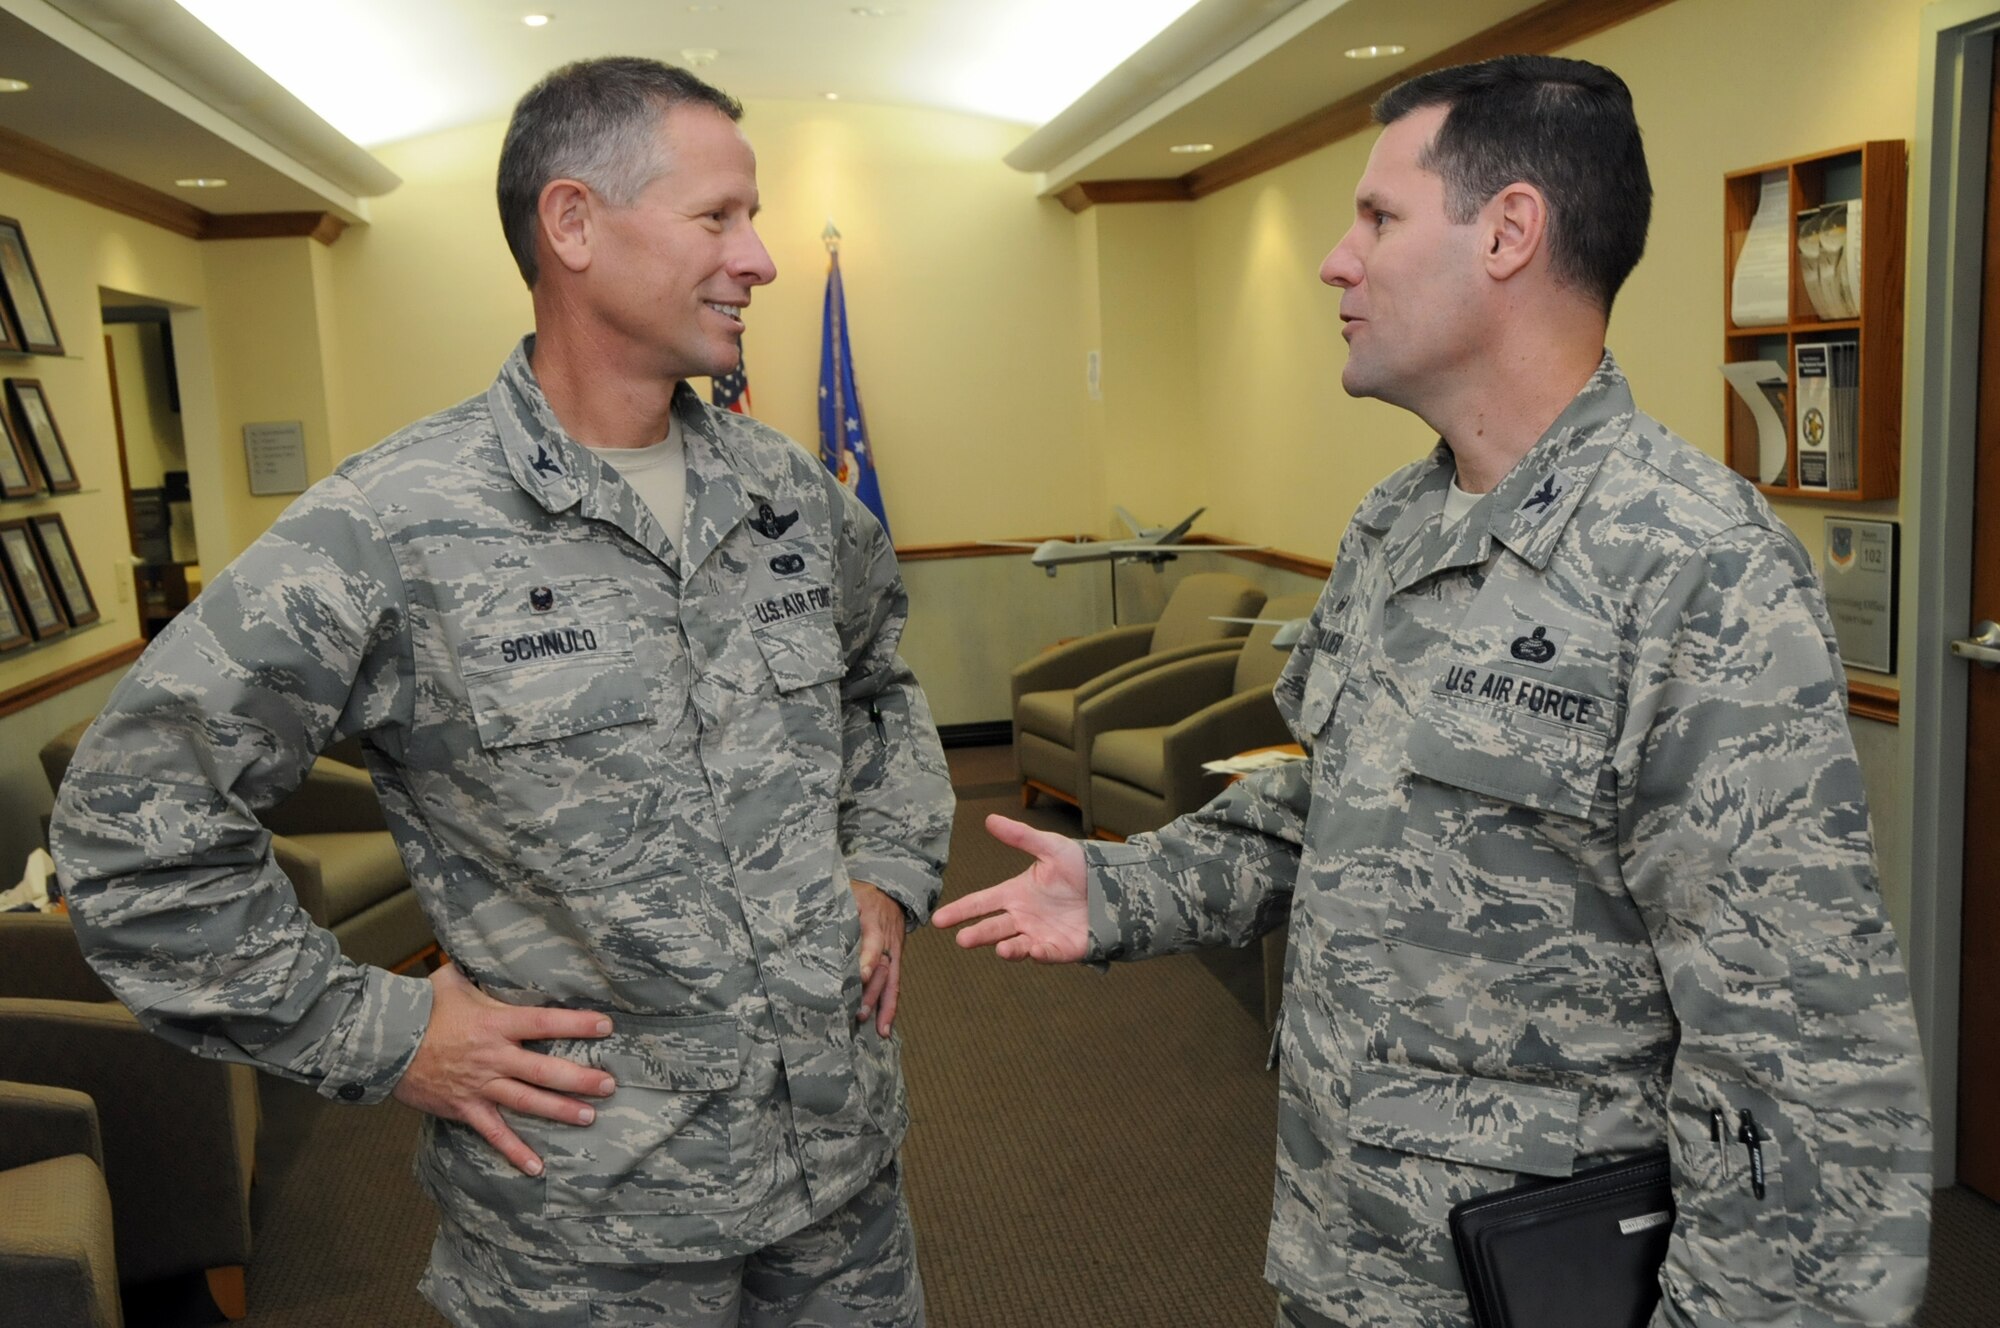 Col. John Devillier, 88th Air Base Wing commander, and Col. Gregory Schnulo, 178th Wing commander, meet at Springfield Air National Guard Base Oct. 29. Leaders from the 88th visited Springfield to gain a better understanding of the 178th Wing’s missions and strengthen their existing partnership. (Ohio Air National Guard photo by Senior Master Sgt. Joseph Stahl/Released)